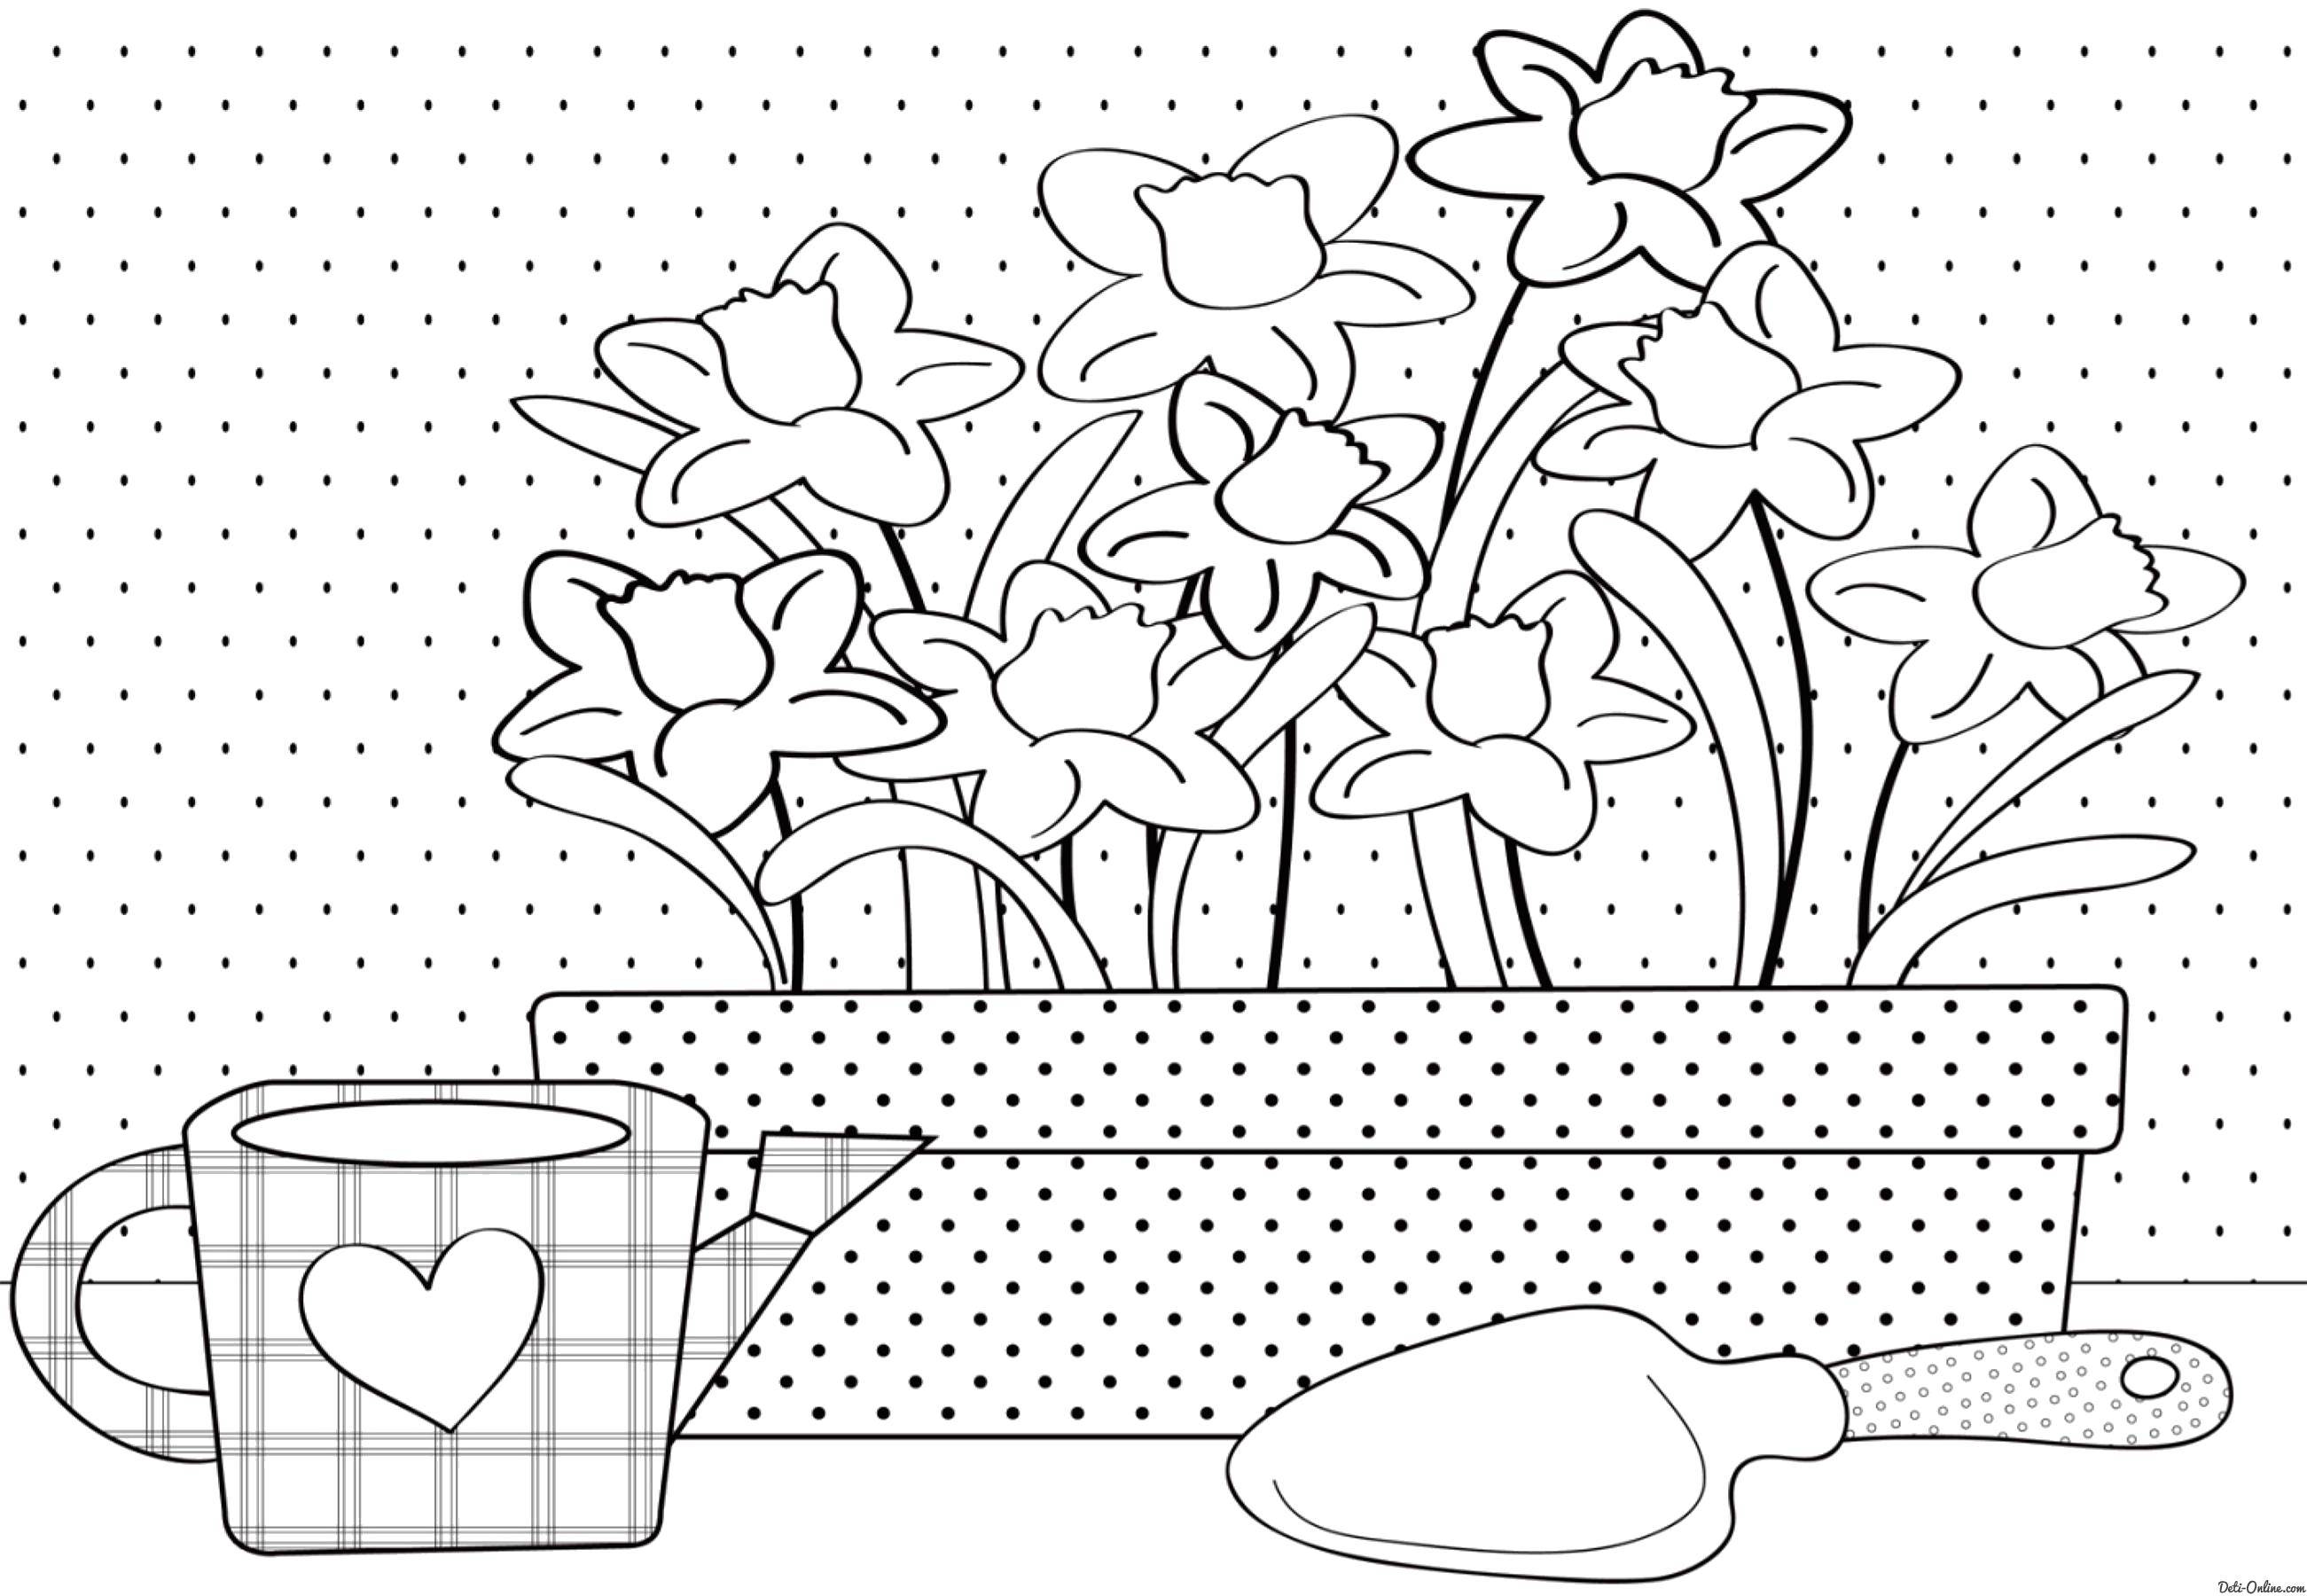 Coloring A pot of flowers. Category spring. Tags:  flowers.